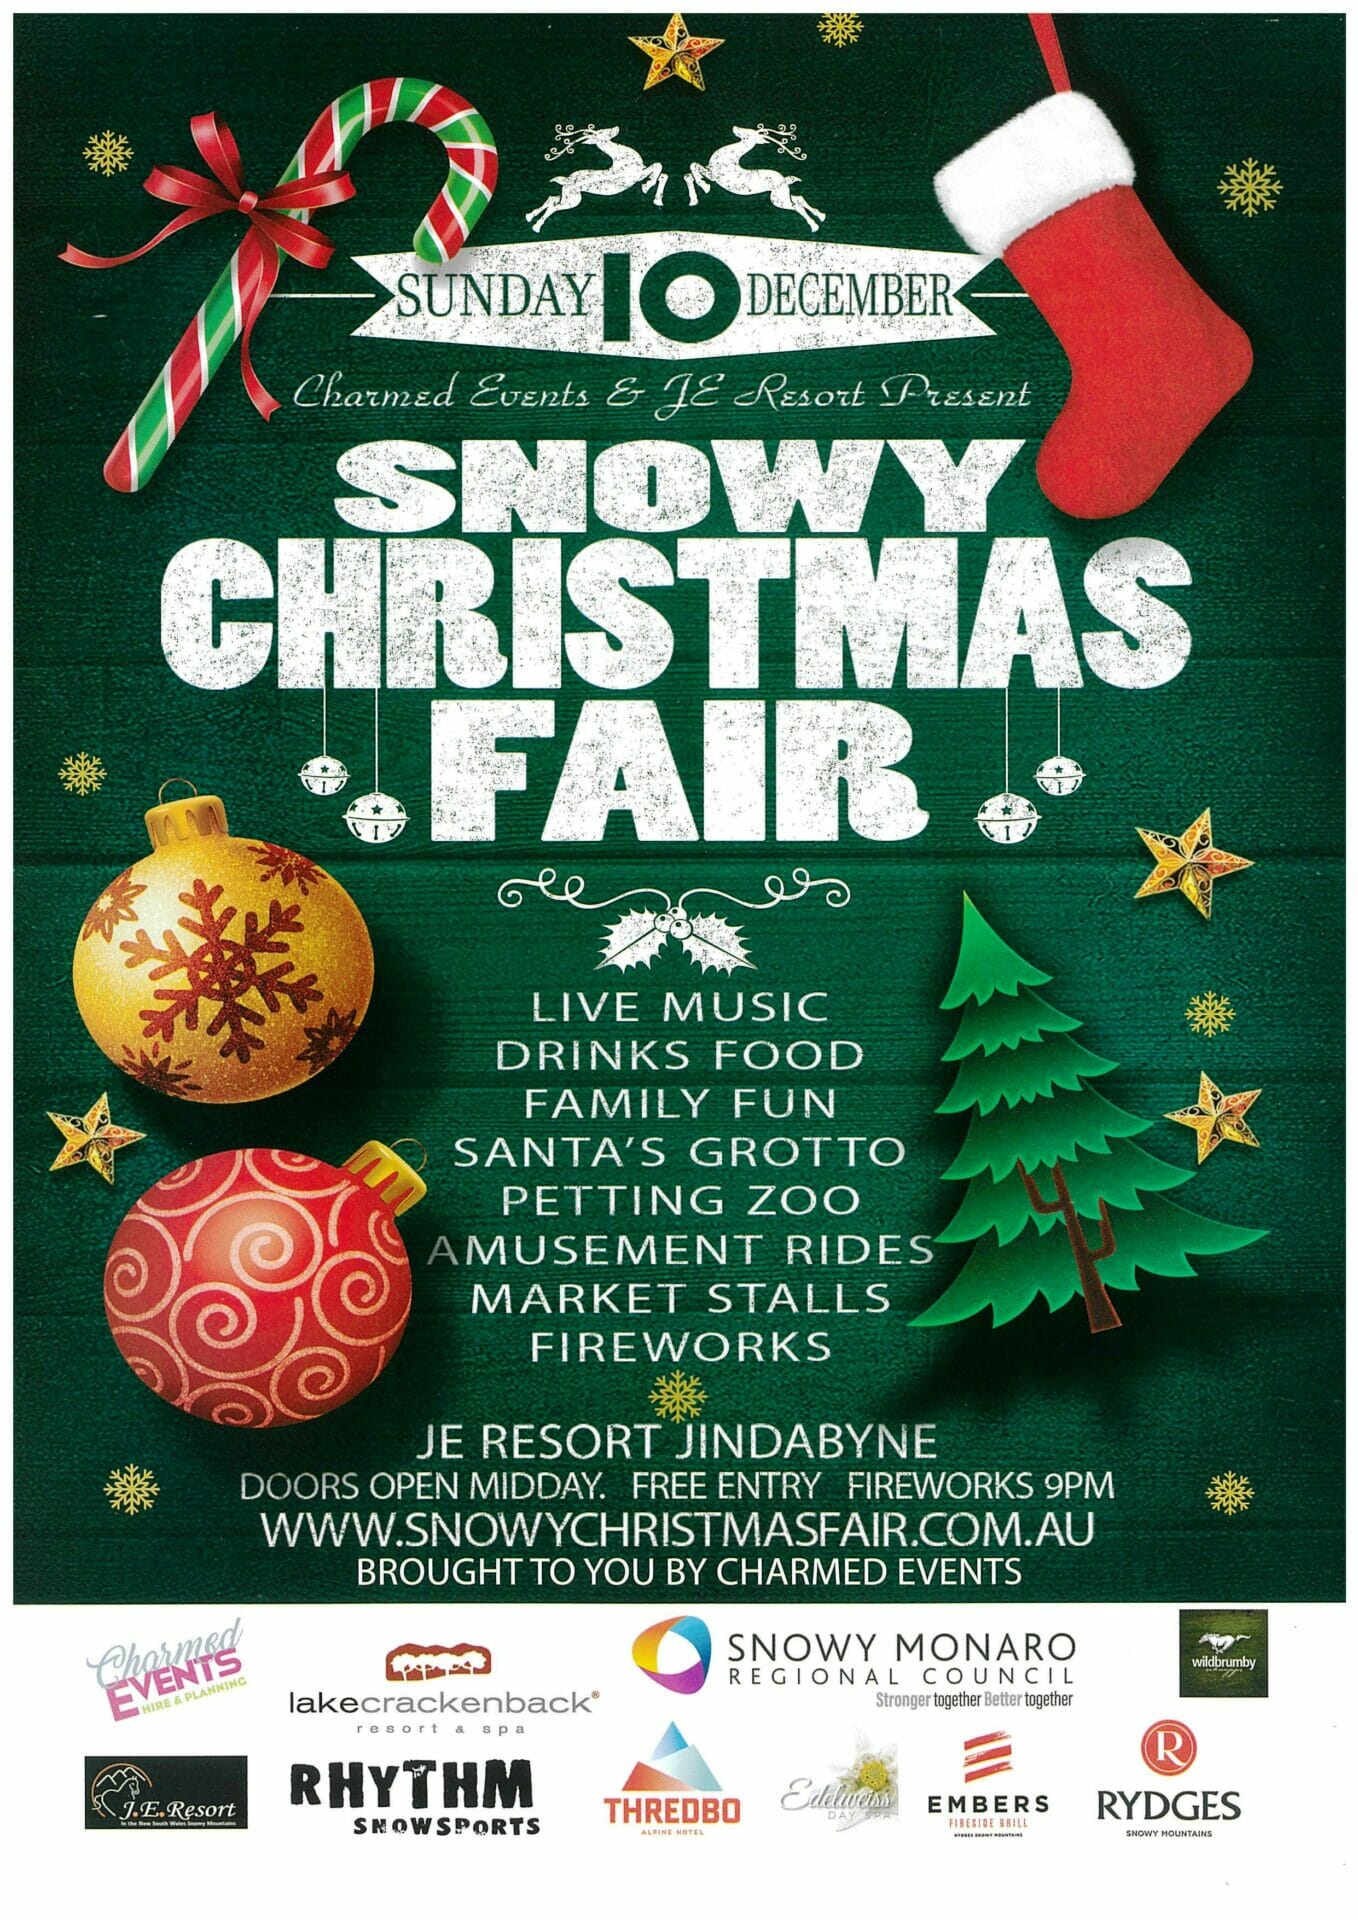 Cooma Visitors Centre - Snowy Christmas Fair JE Resort Charmed Events ...